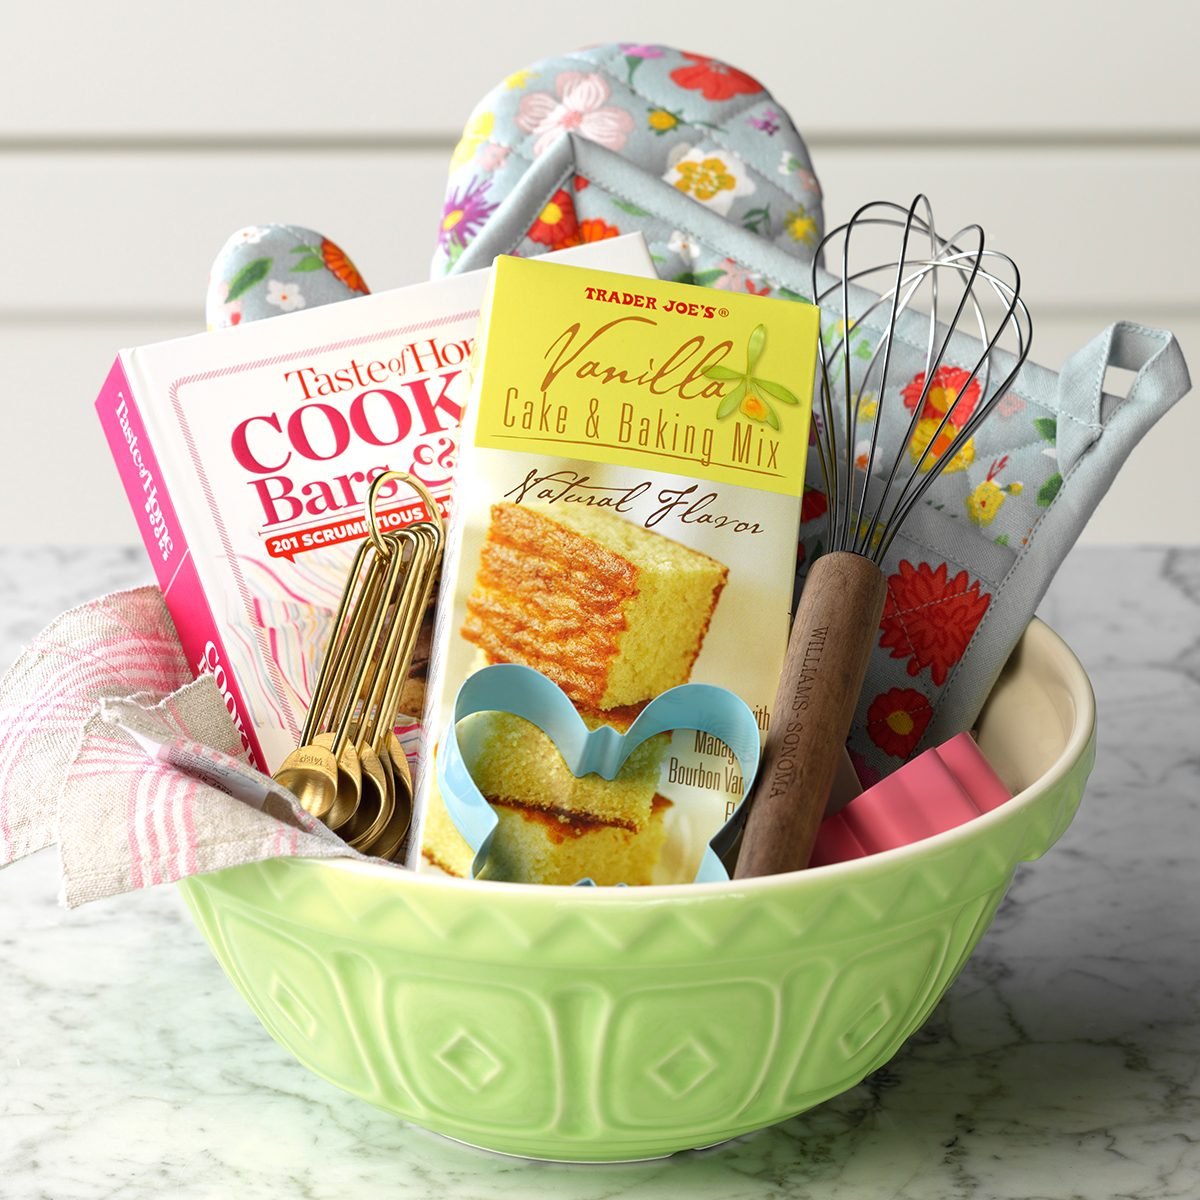 How to Make a Gift Basket for the Baker